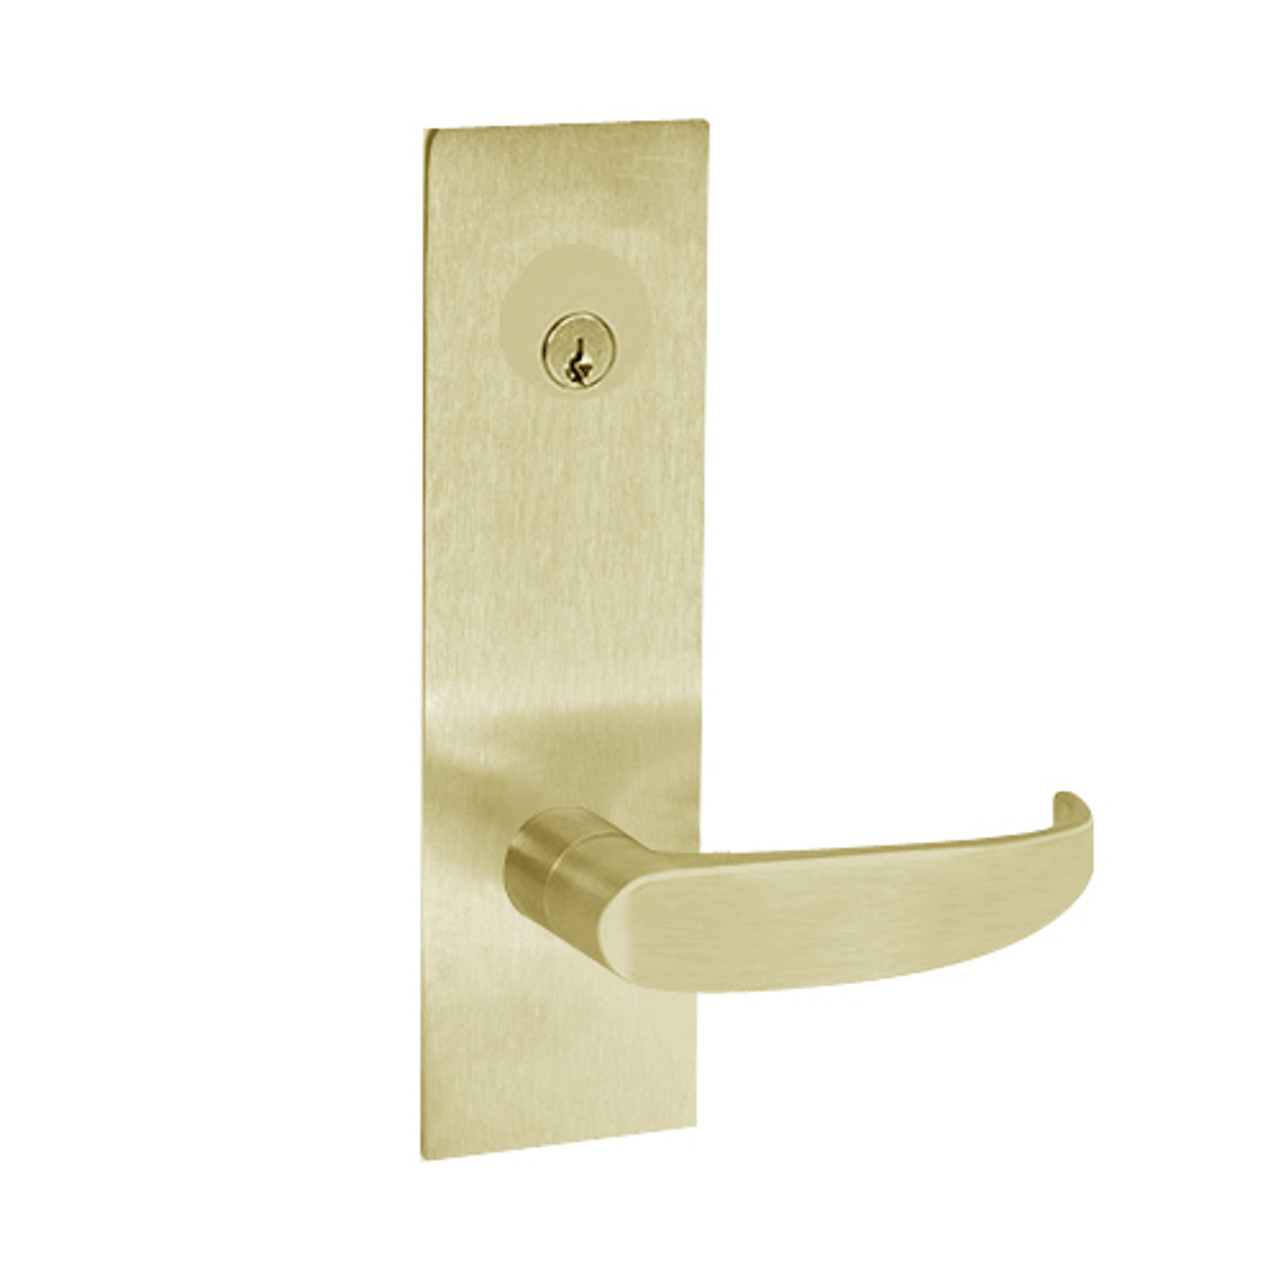 Z7850LRDGE SDC Z7800 Selectric Pro Series Locked Outside Sides Failsafe Electric Mortise Lock with Galaxy Lever in Satin Brass